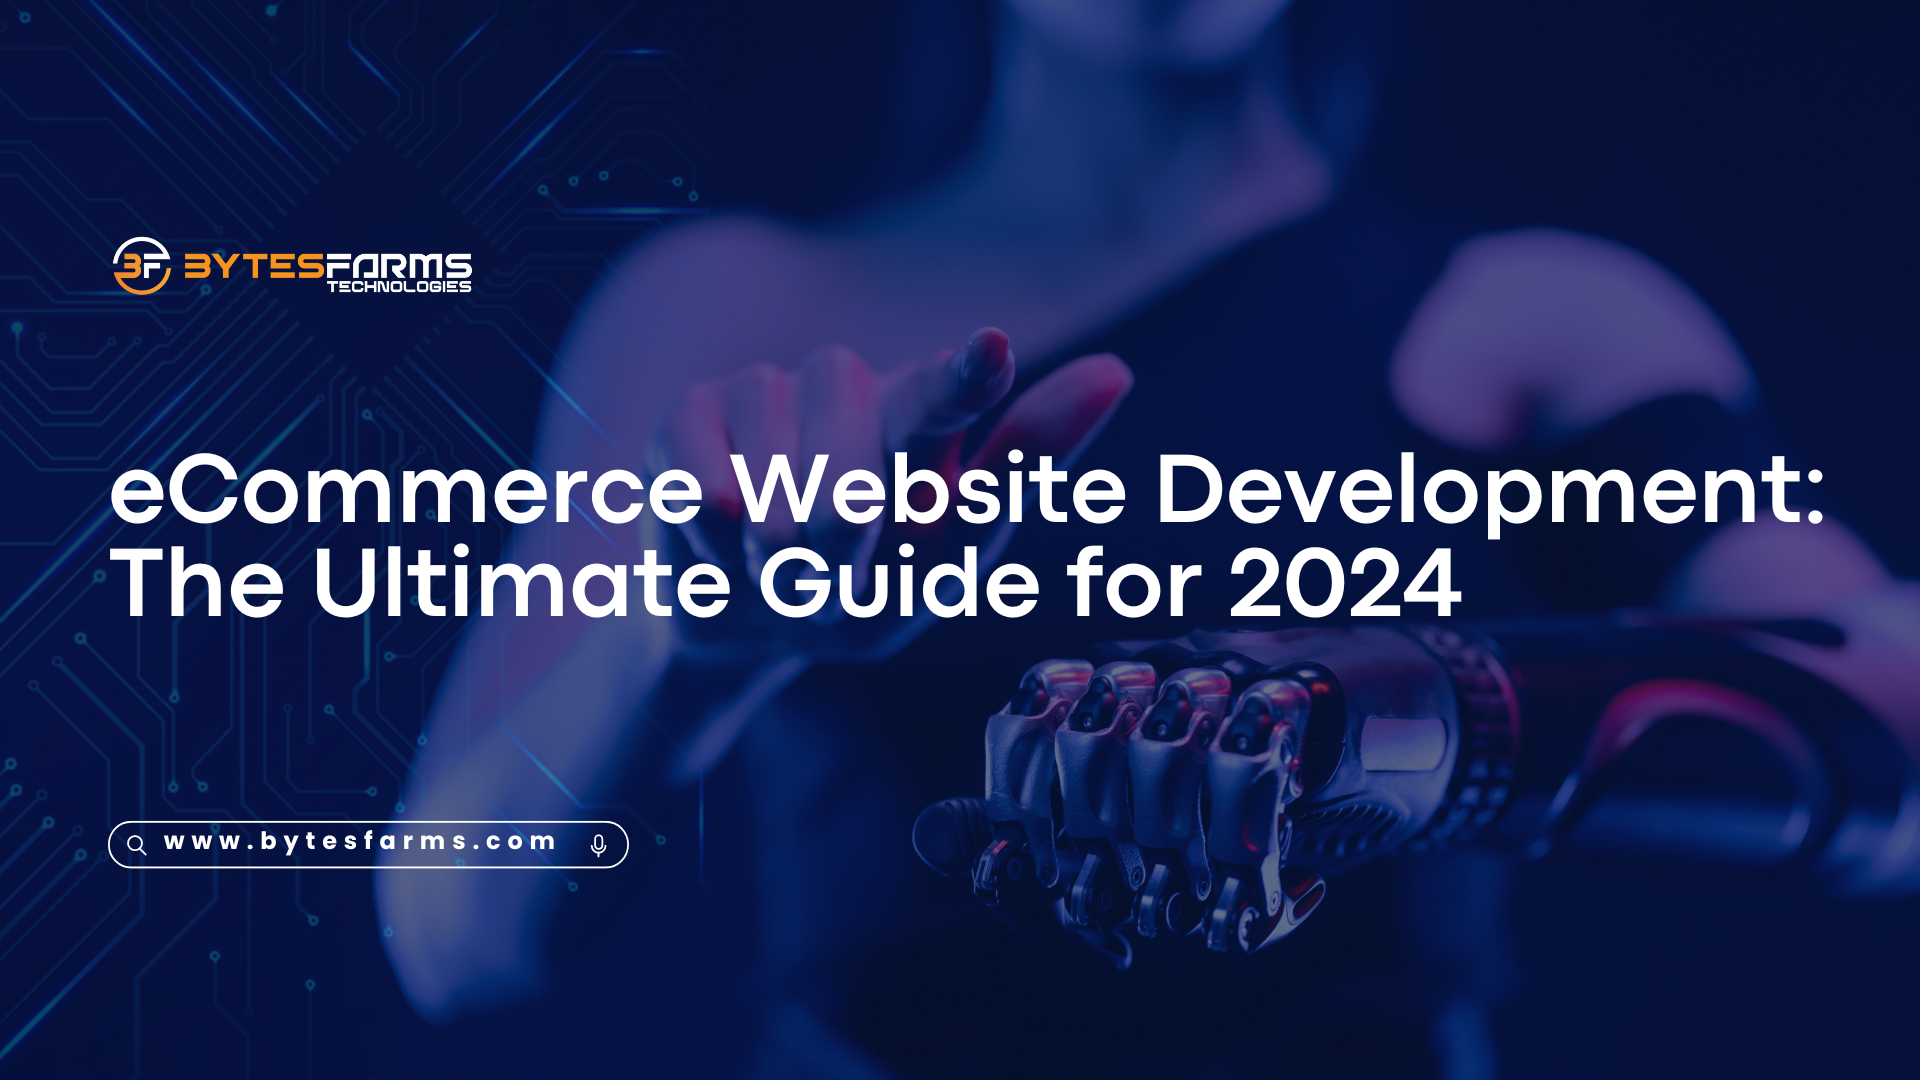 eCommerce Website Development: The Ultimate Guide for 2024